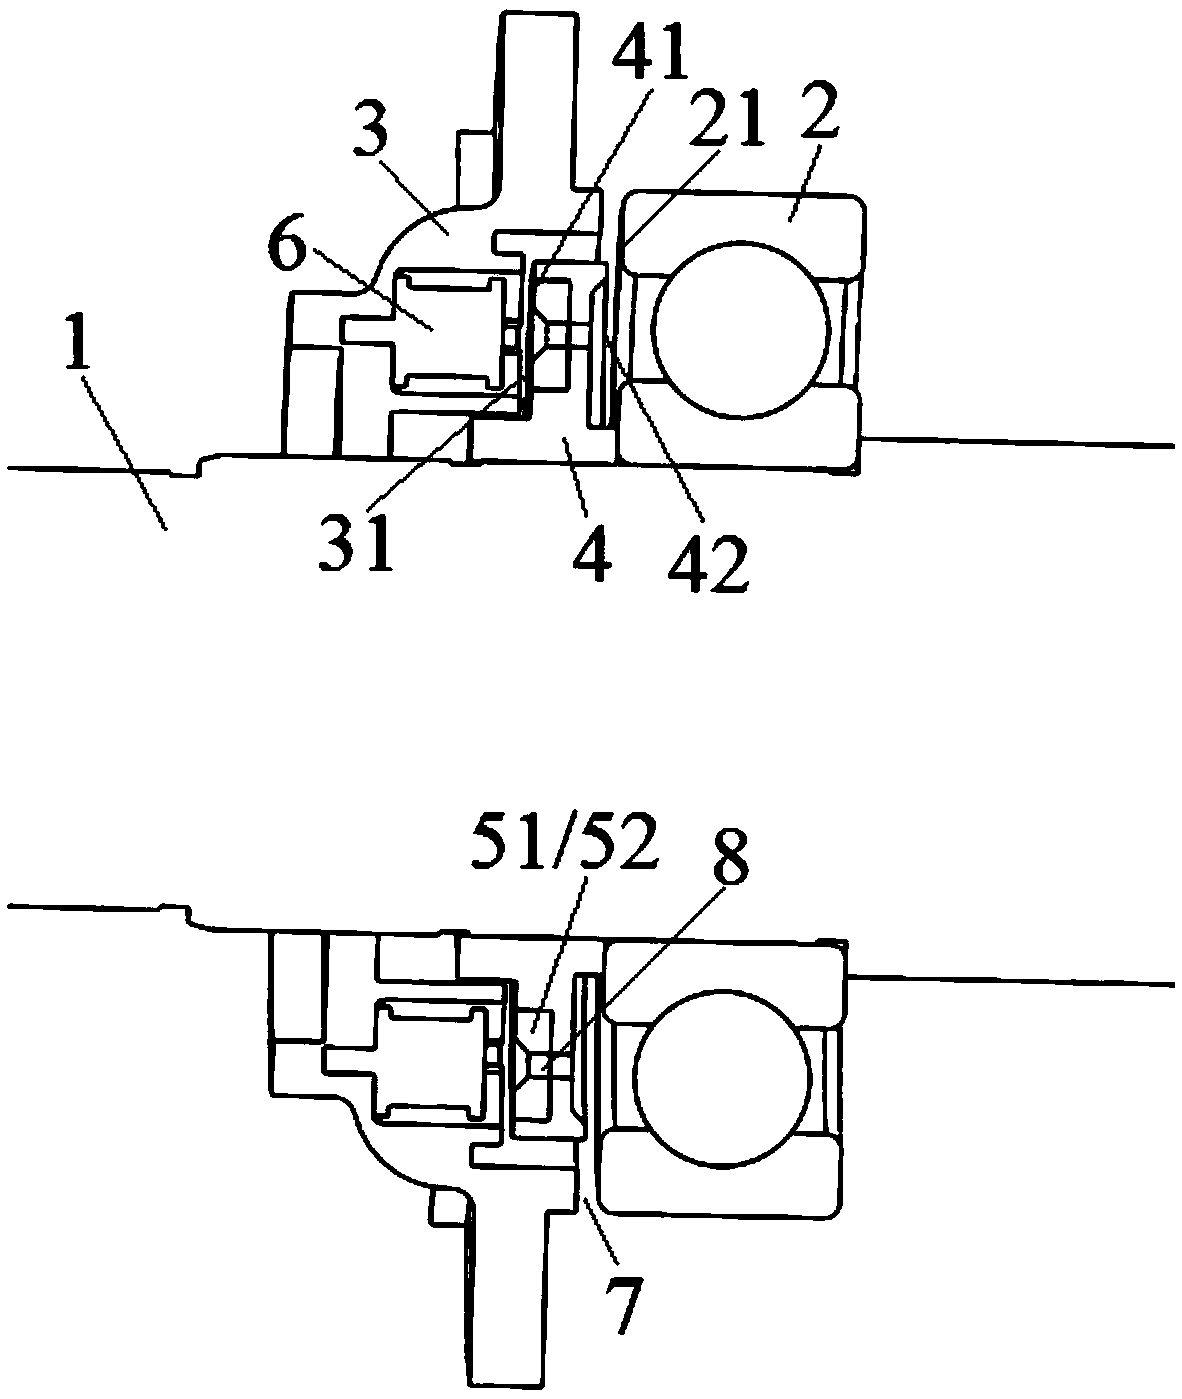 A rotating assembly capable of generating electricity by utilizing self-radial rotating power